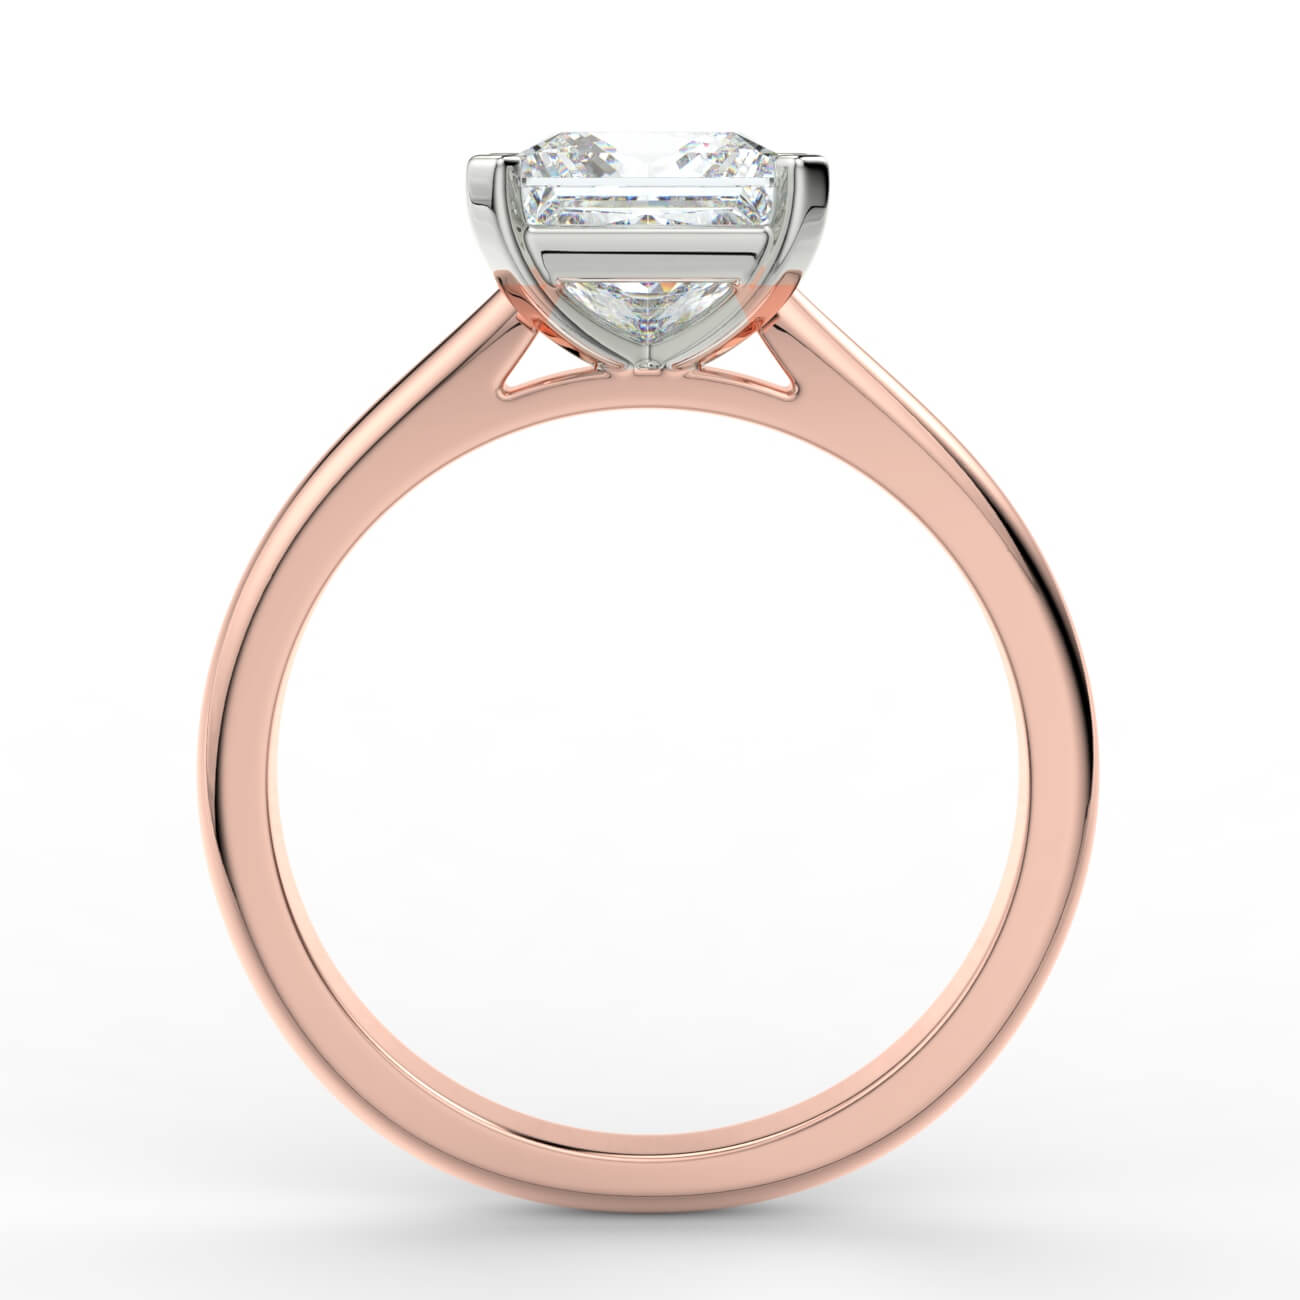 Princess cut diamond cathedral engagement ring in rose and white gold – Australian Diamond Network